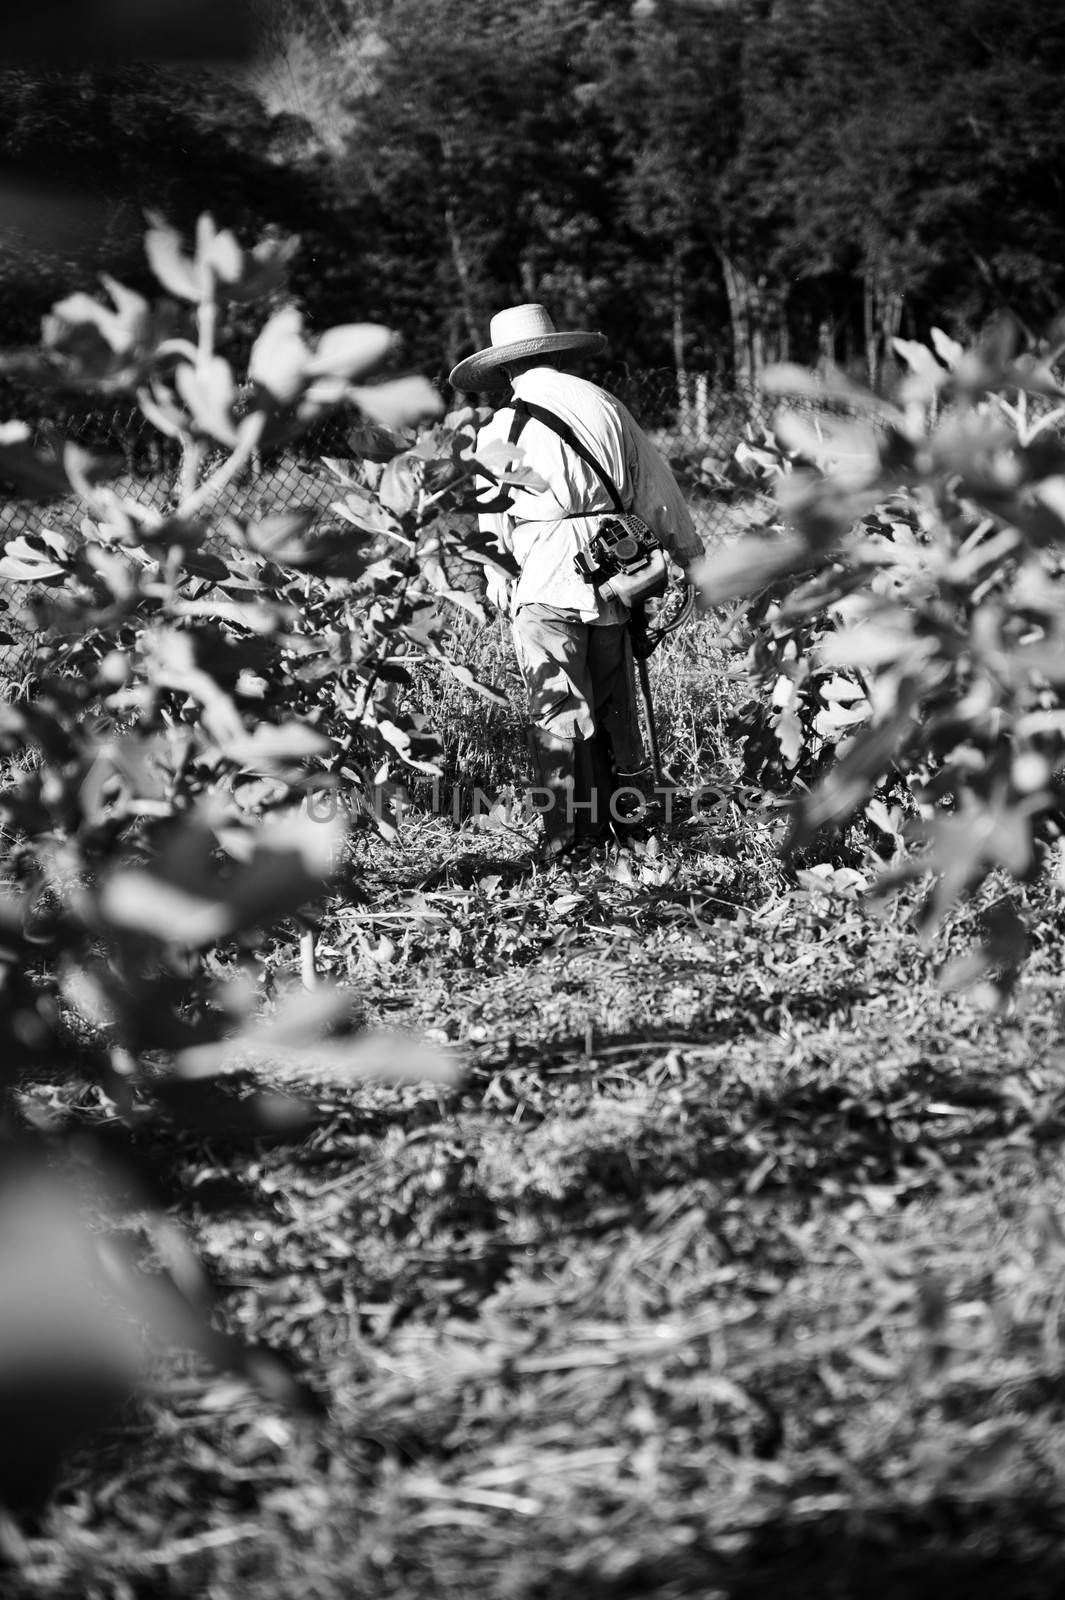 Black and white photo of fig plantation and worker in hat.